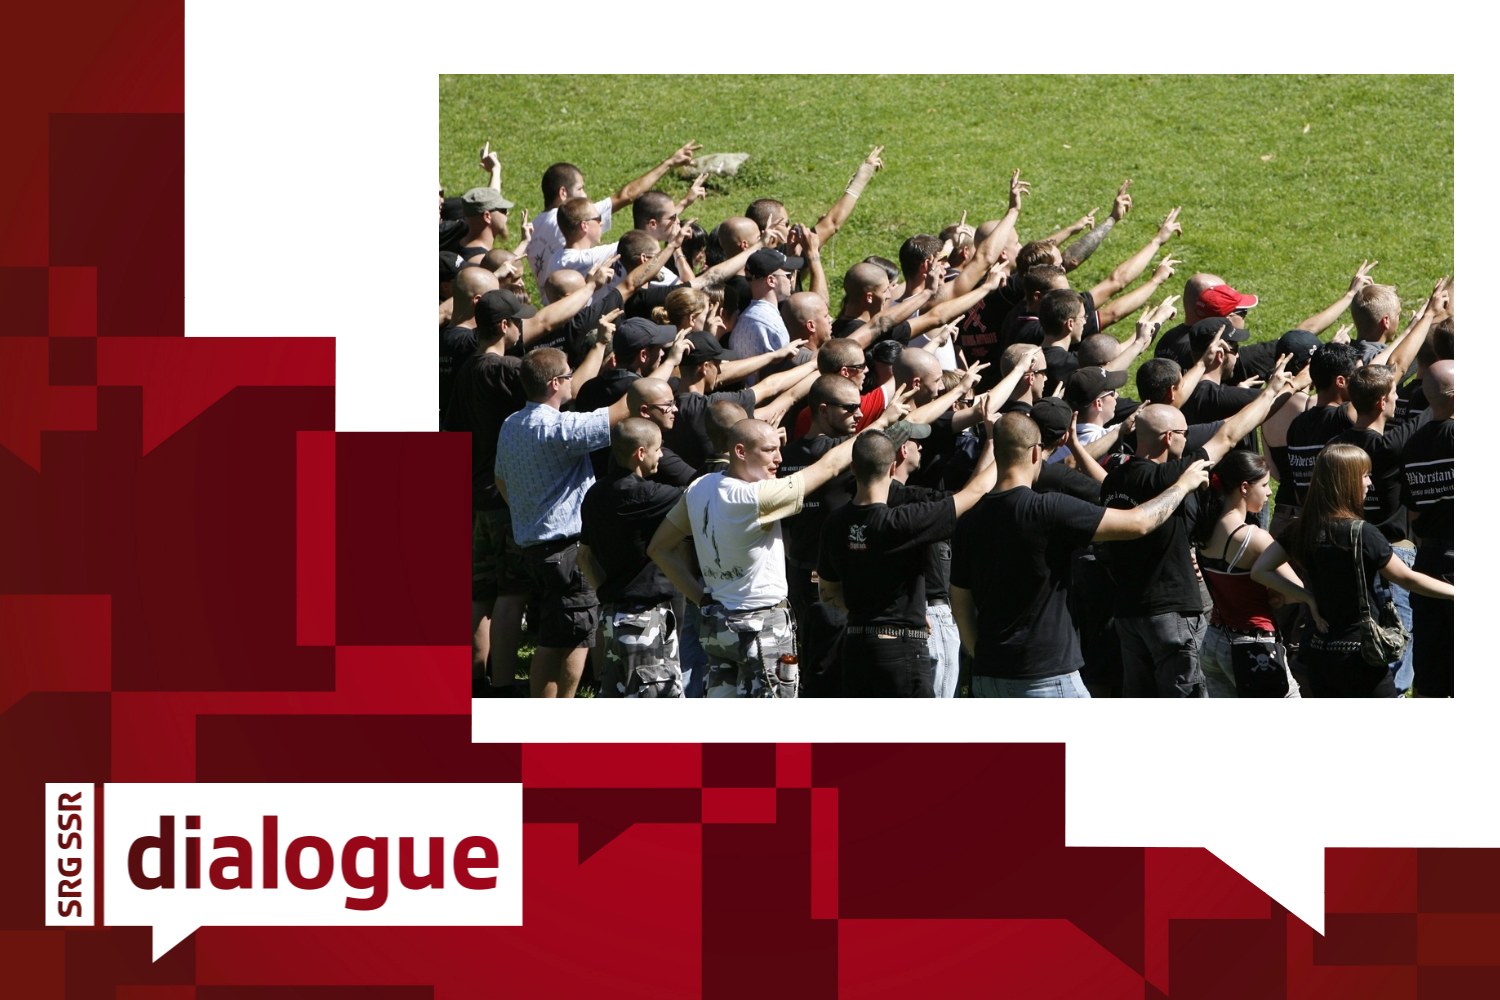 ‘Dialogue’: Are you concerned about increasing violence and radicalisation among young people in Switzerland?